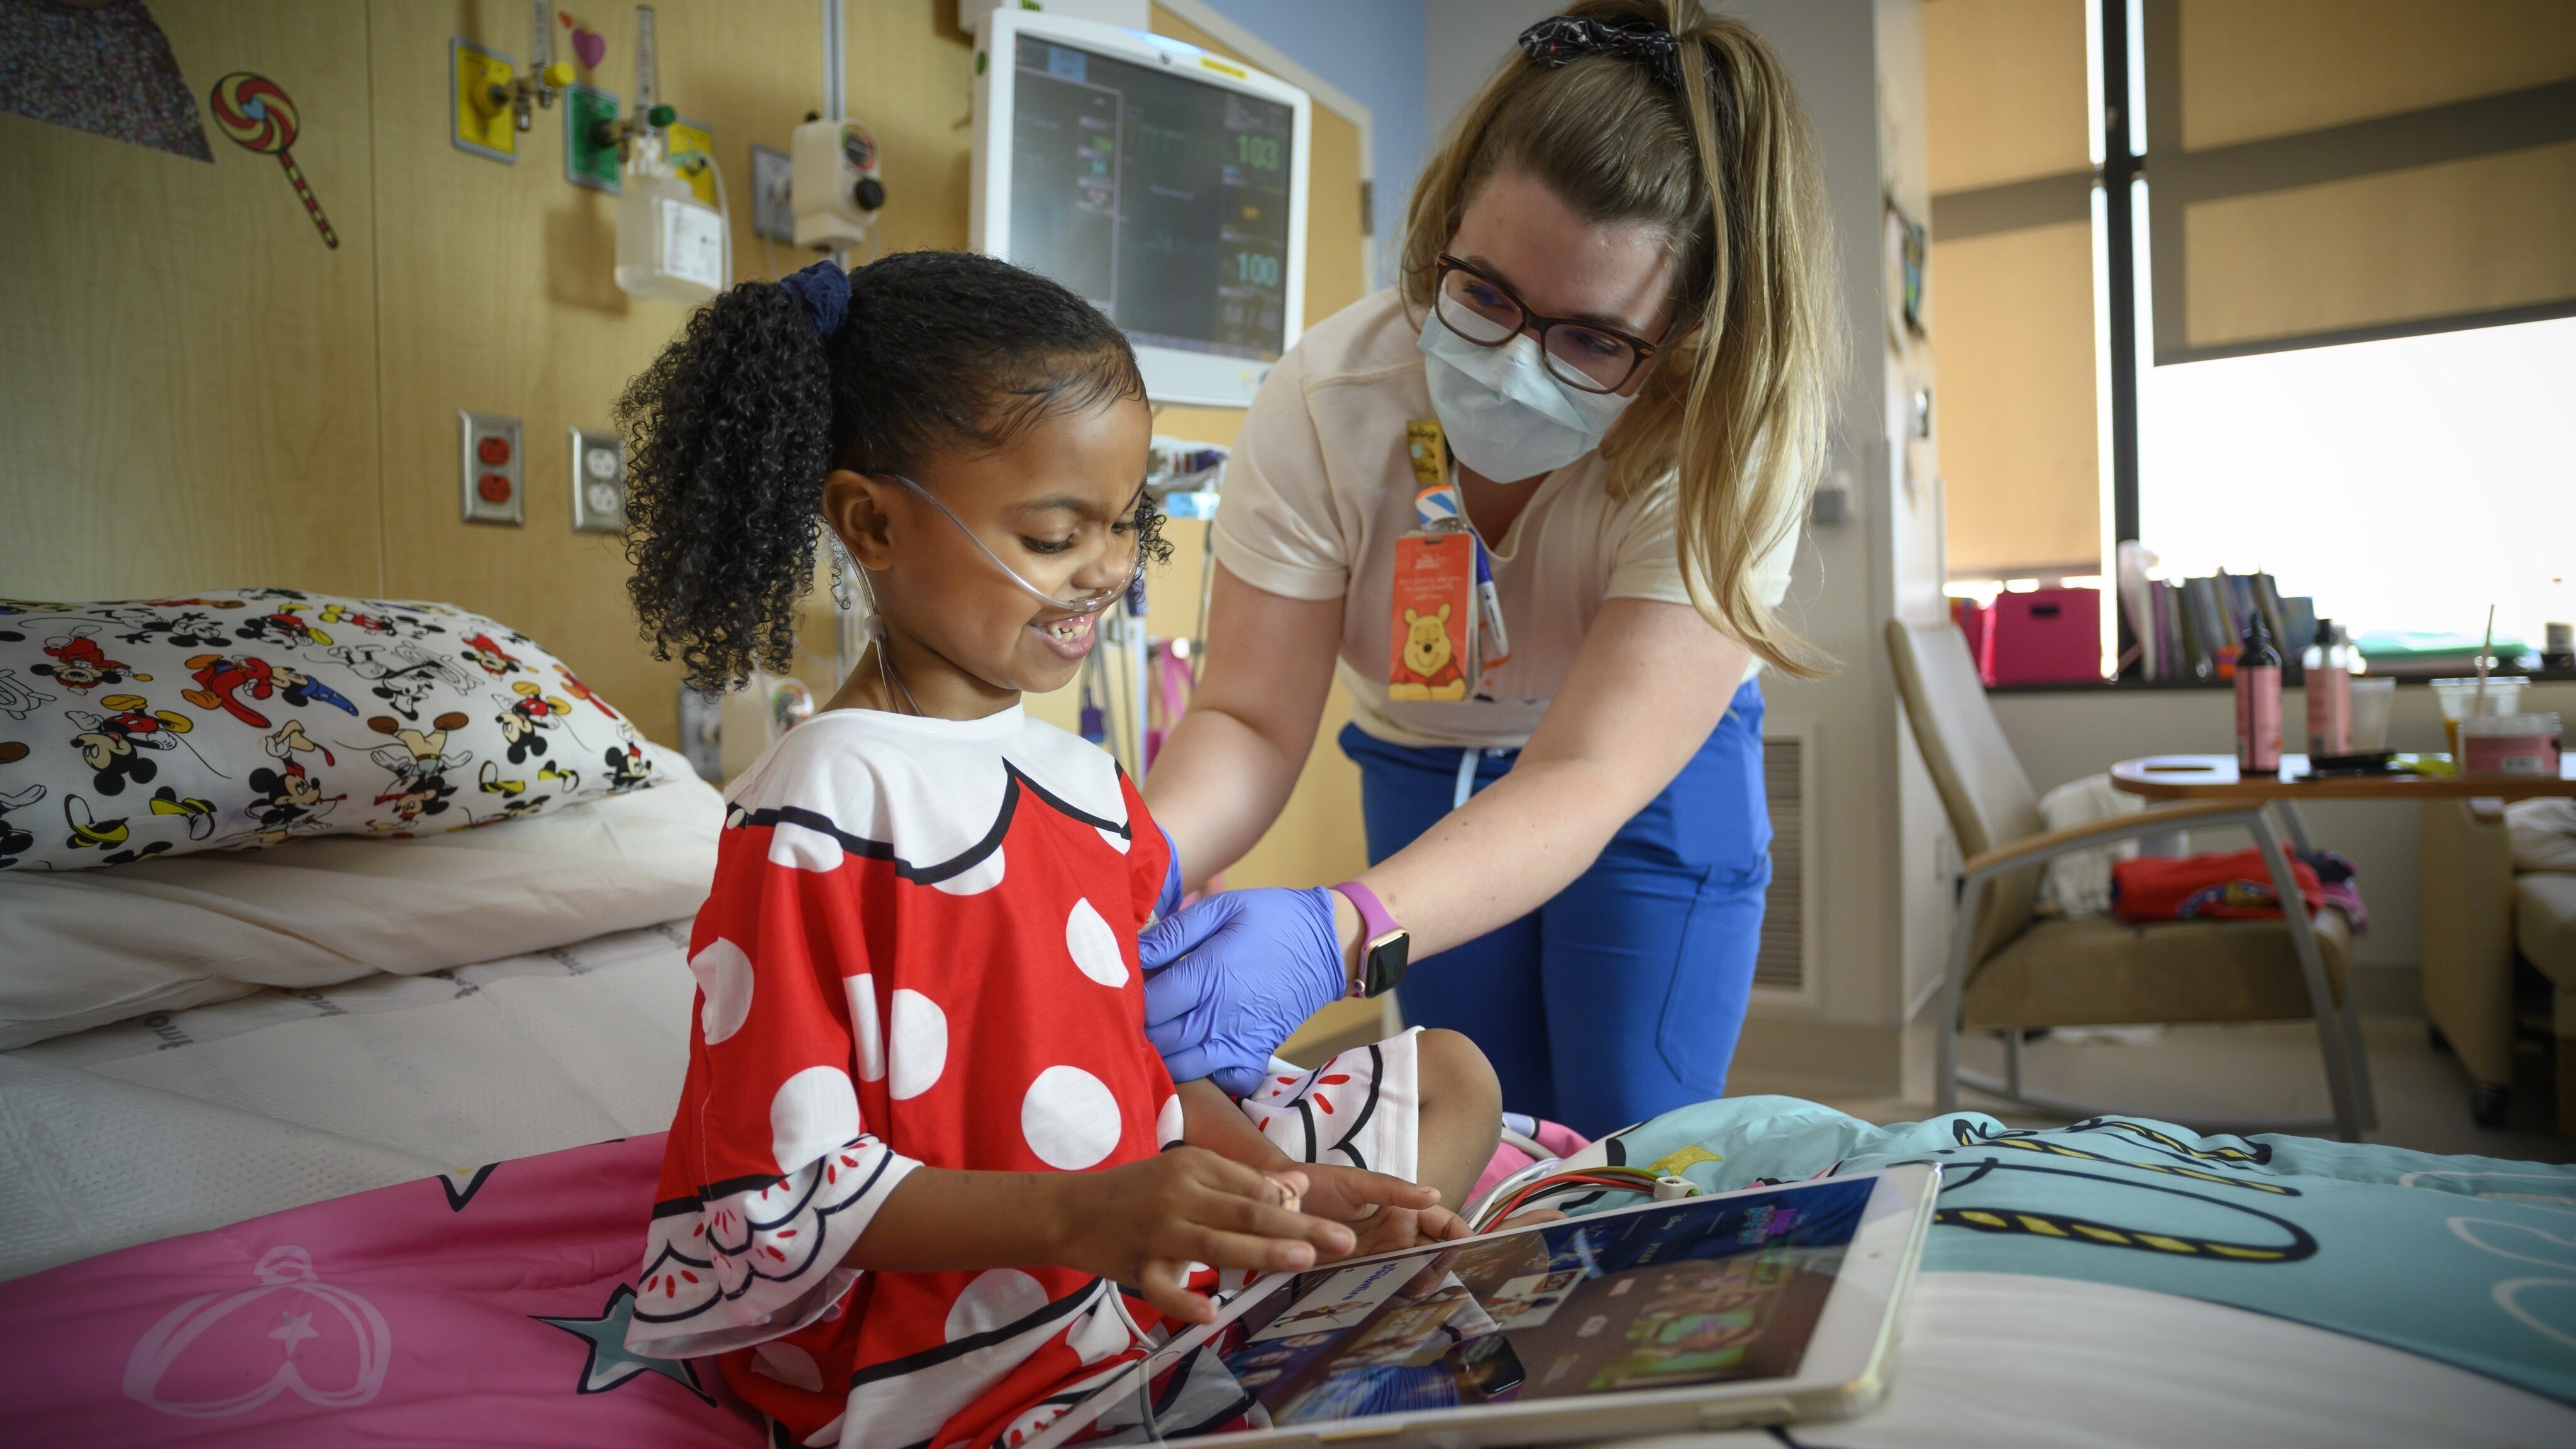 Disney+ expanding access to EMEA hospitals and places of care in celebration of Disney+ Day